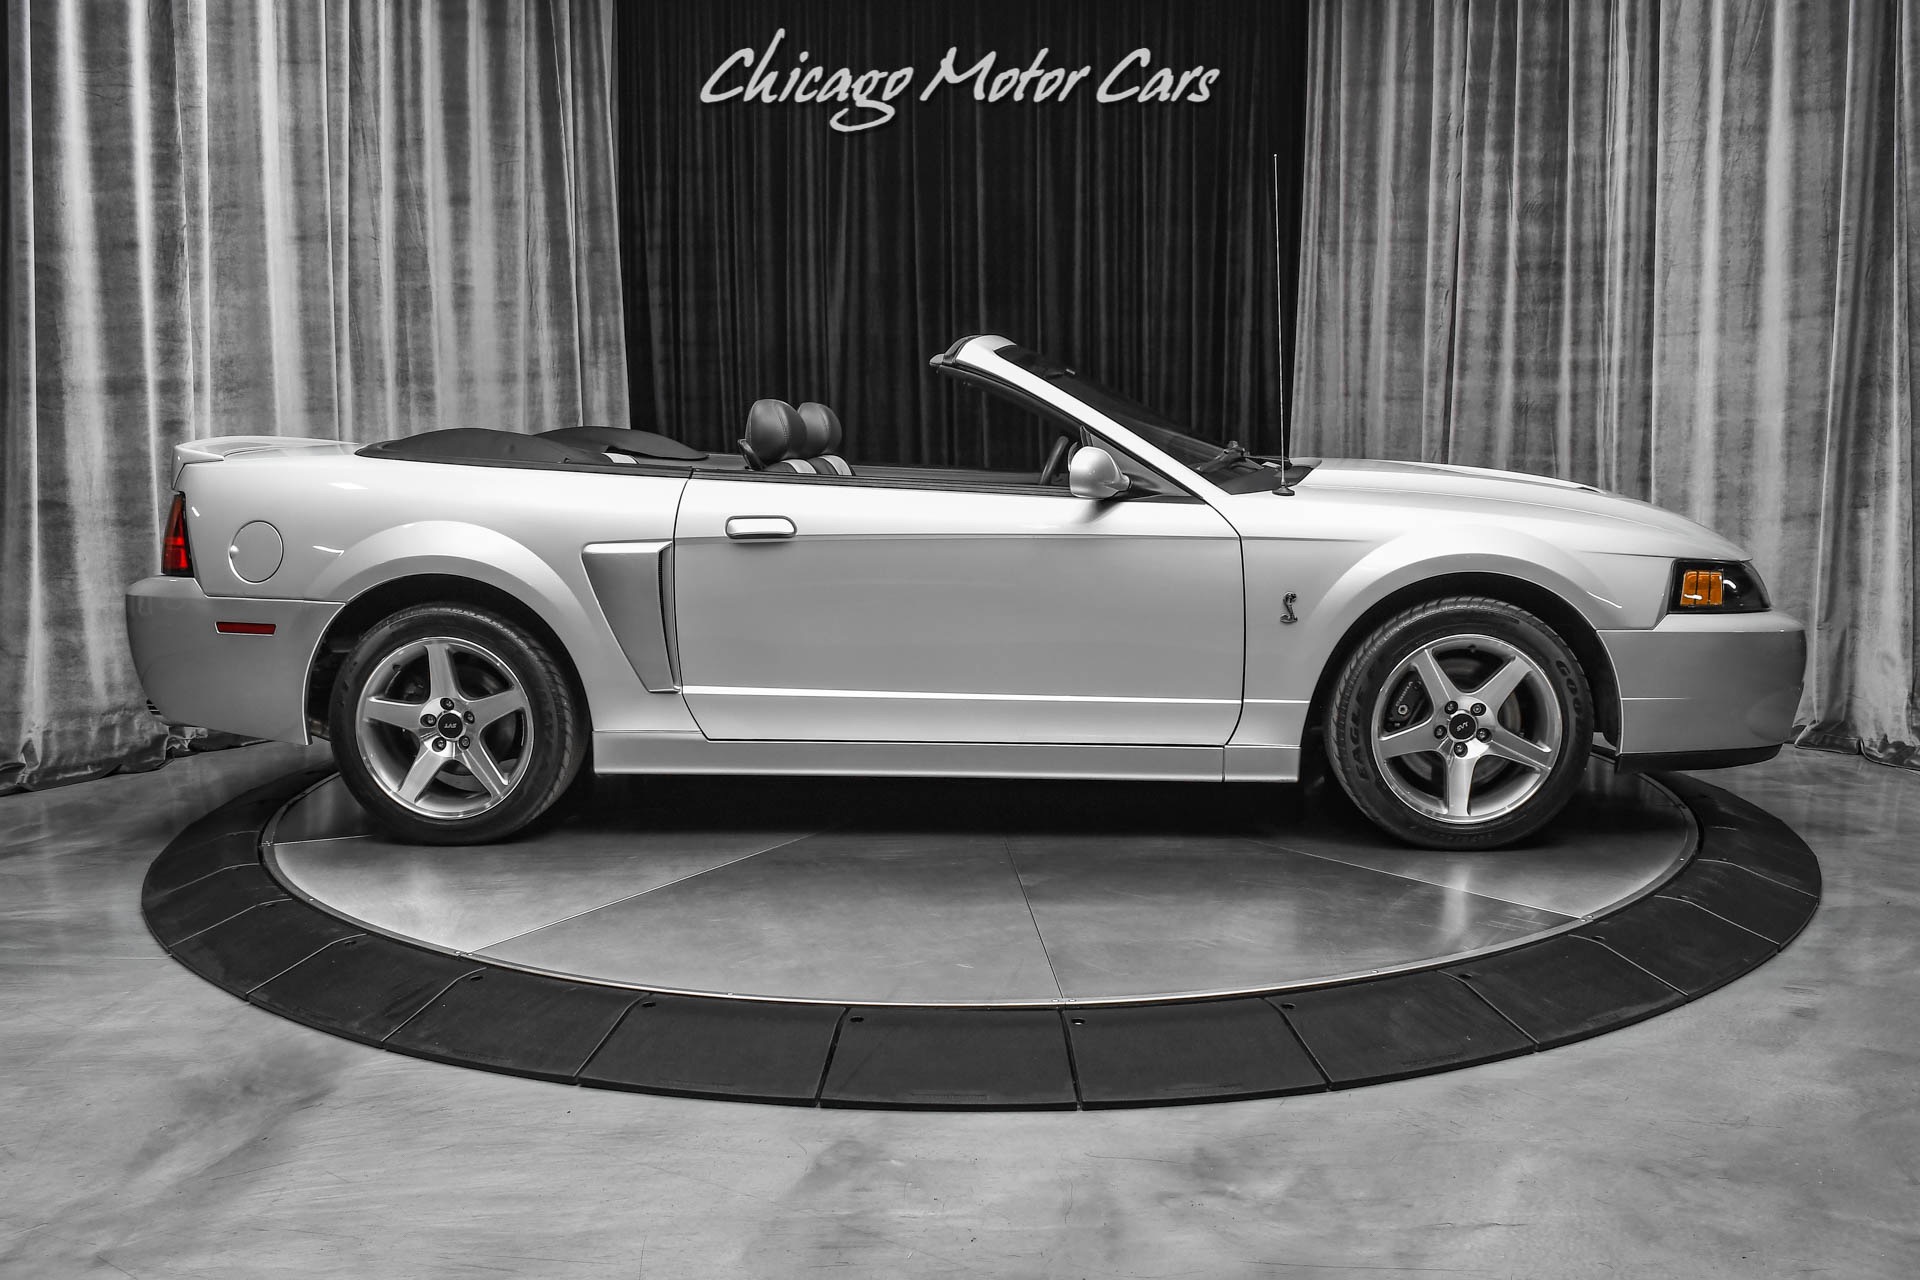 Used-2003-Ford-Mustang-SVT-Cobra-Convertible-Factory-Supercharged-450-HP-6-Speed-Manual-Only-7k-miles